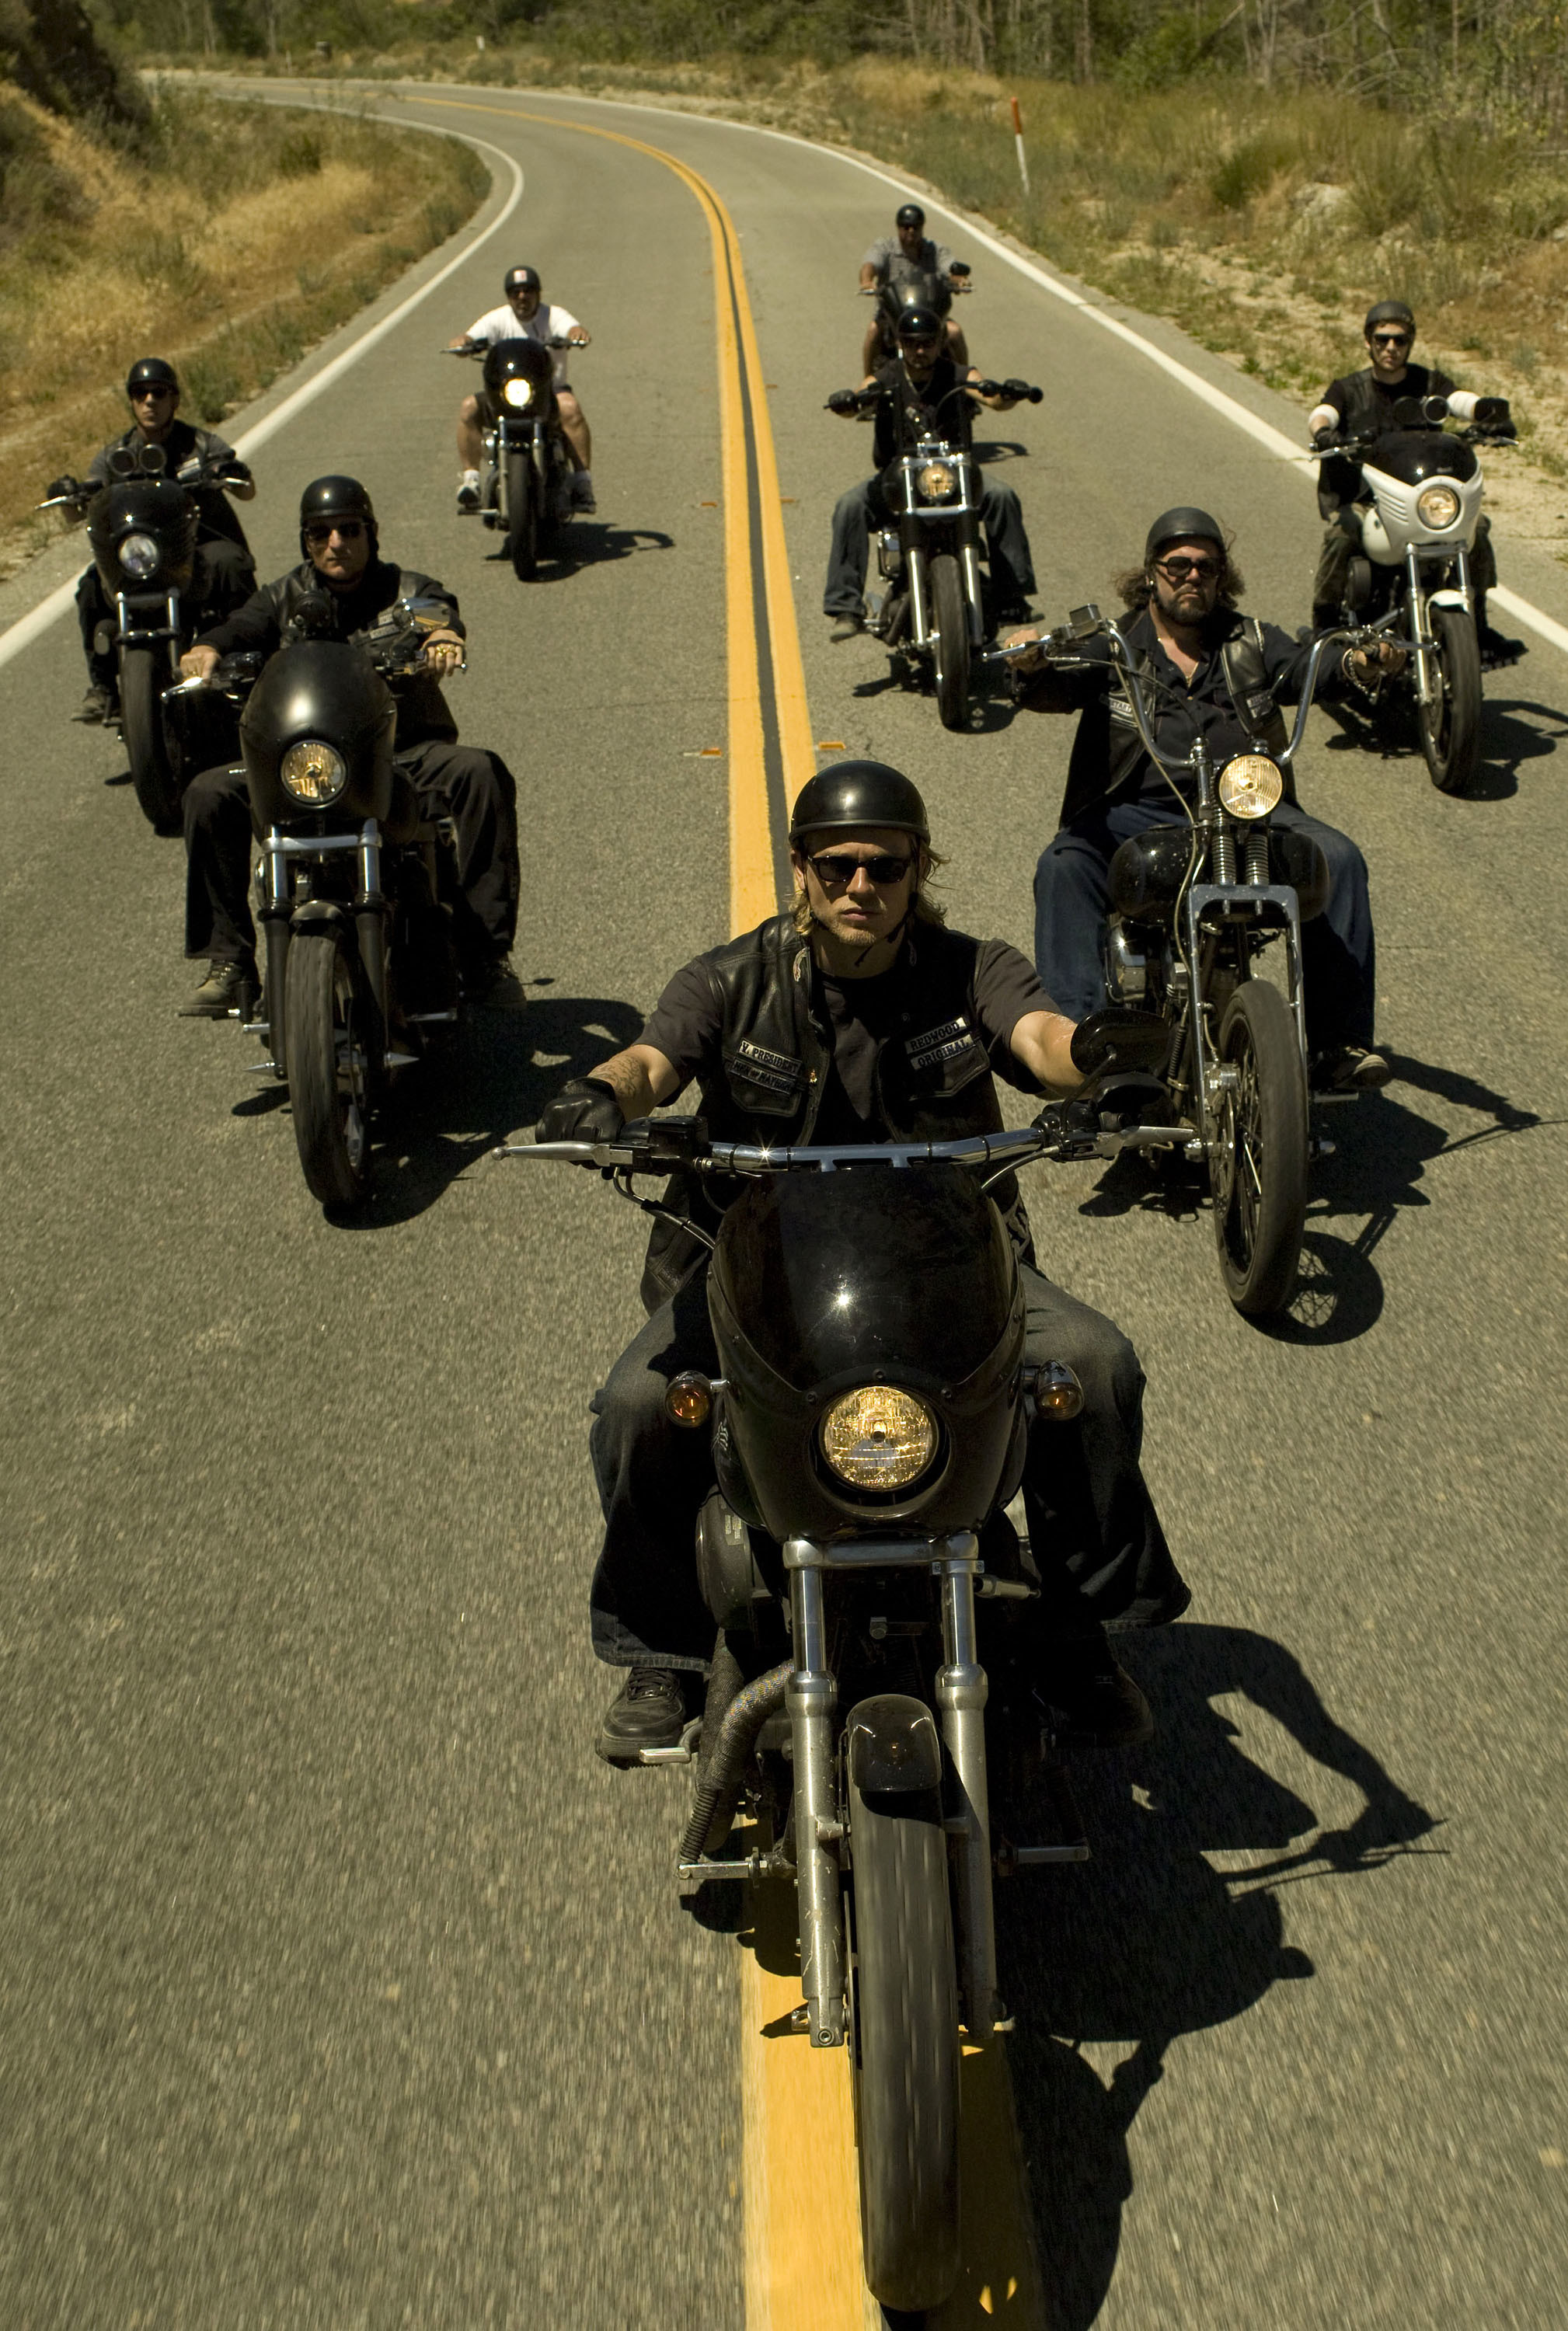 2018x3000 sons of anarchy wallpaper 1280x720 - Pesquisa Google